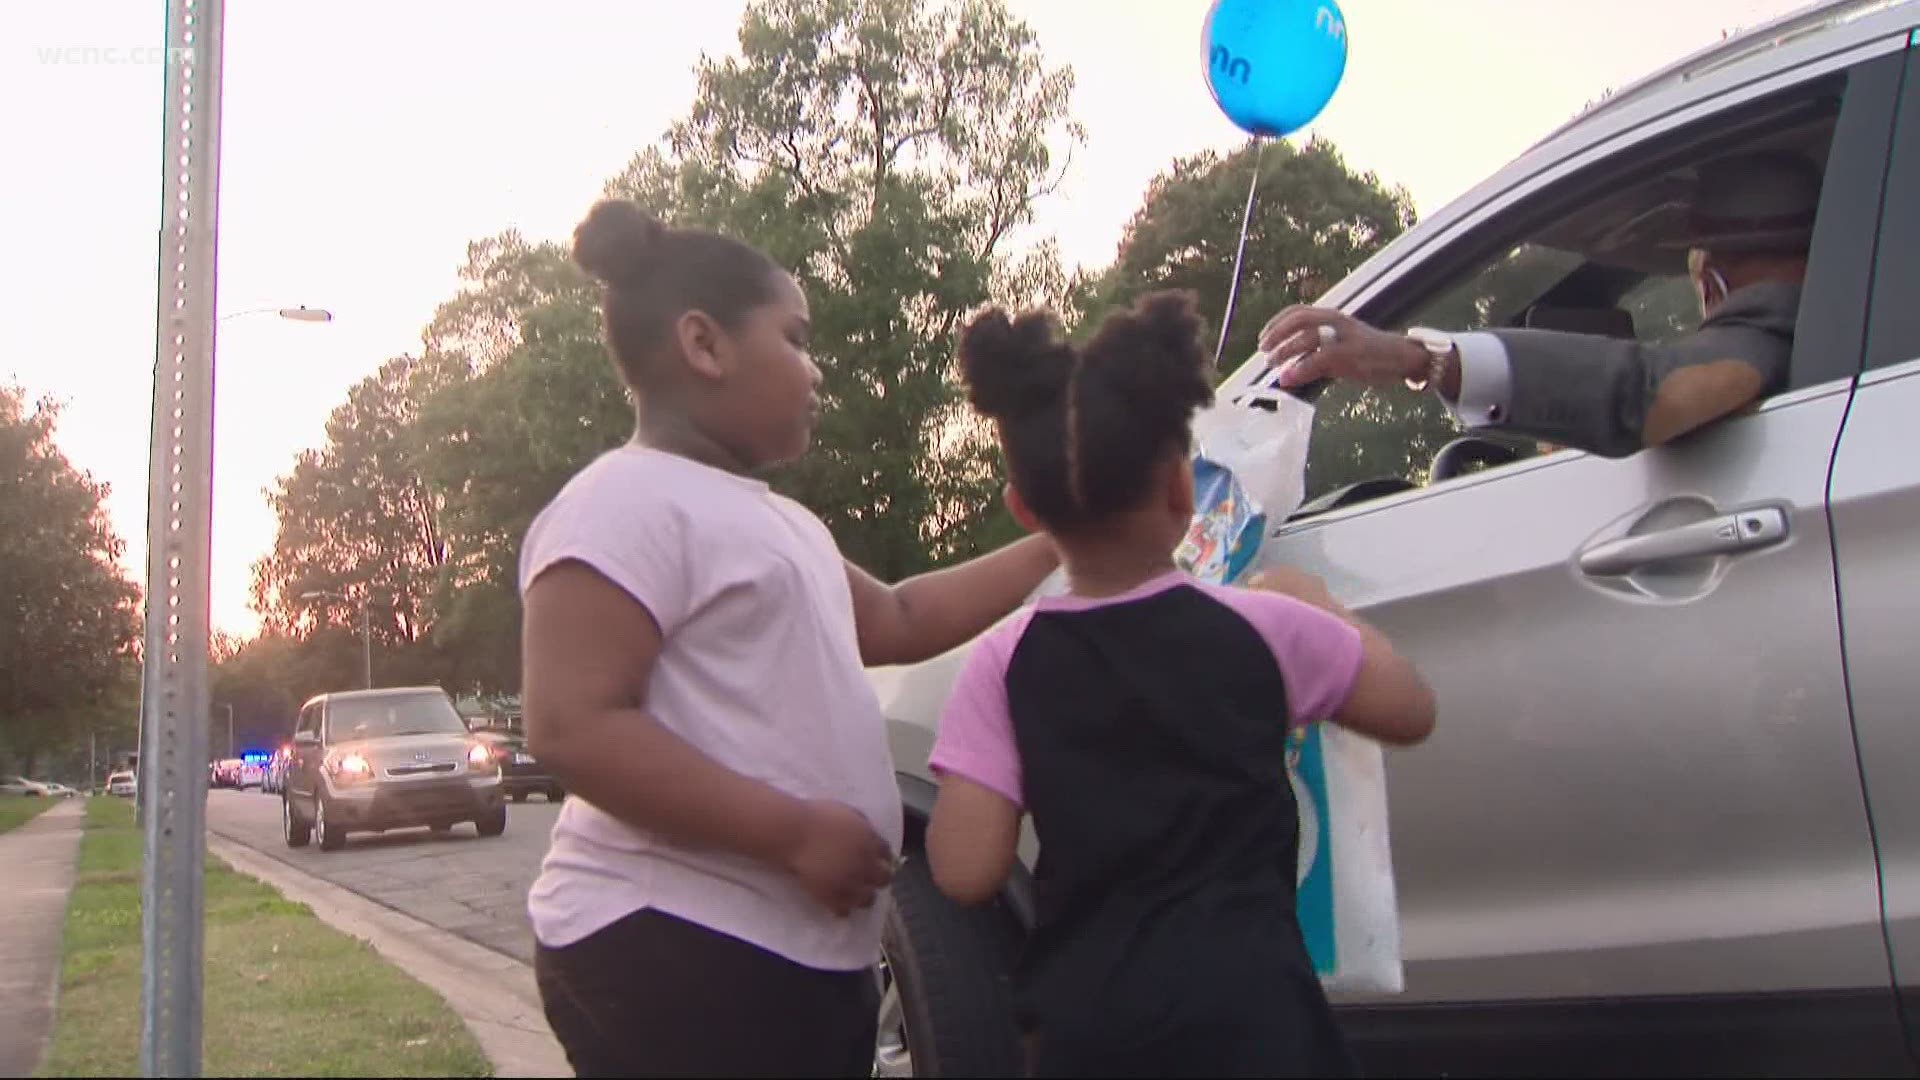 Neighborhoods across Charlotte celebrated National Night Out Tuesday, part of a partnership between the community and law enforcement to make neighborhoods safer.